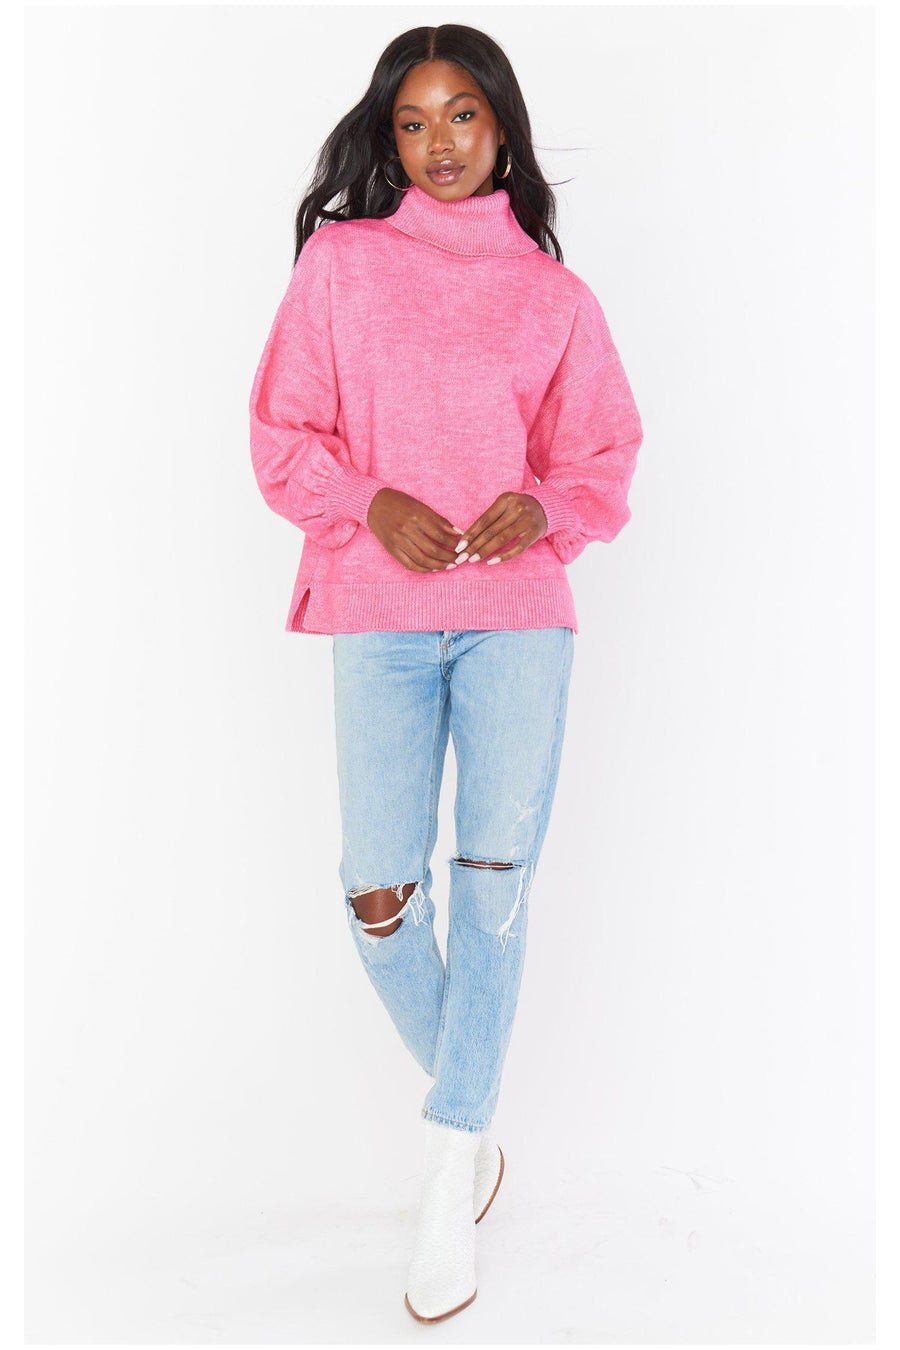 Shop Show Me Your Mumu Chester Hot Pink Knit Jumper - Premium Jumper from Show Me Your Mumu Online now at Spoiled Brat 